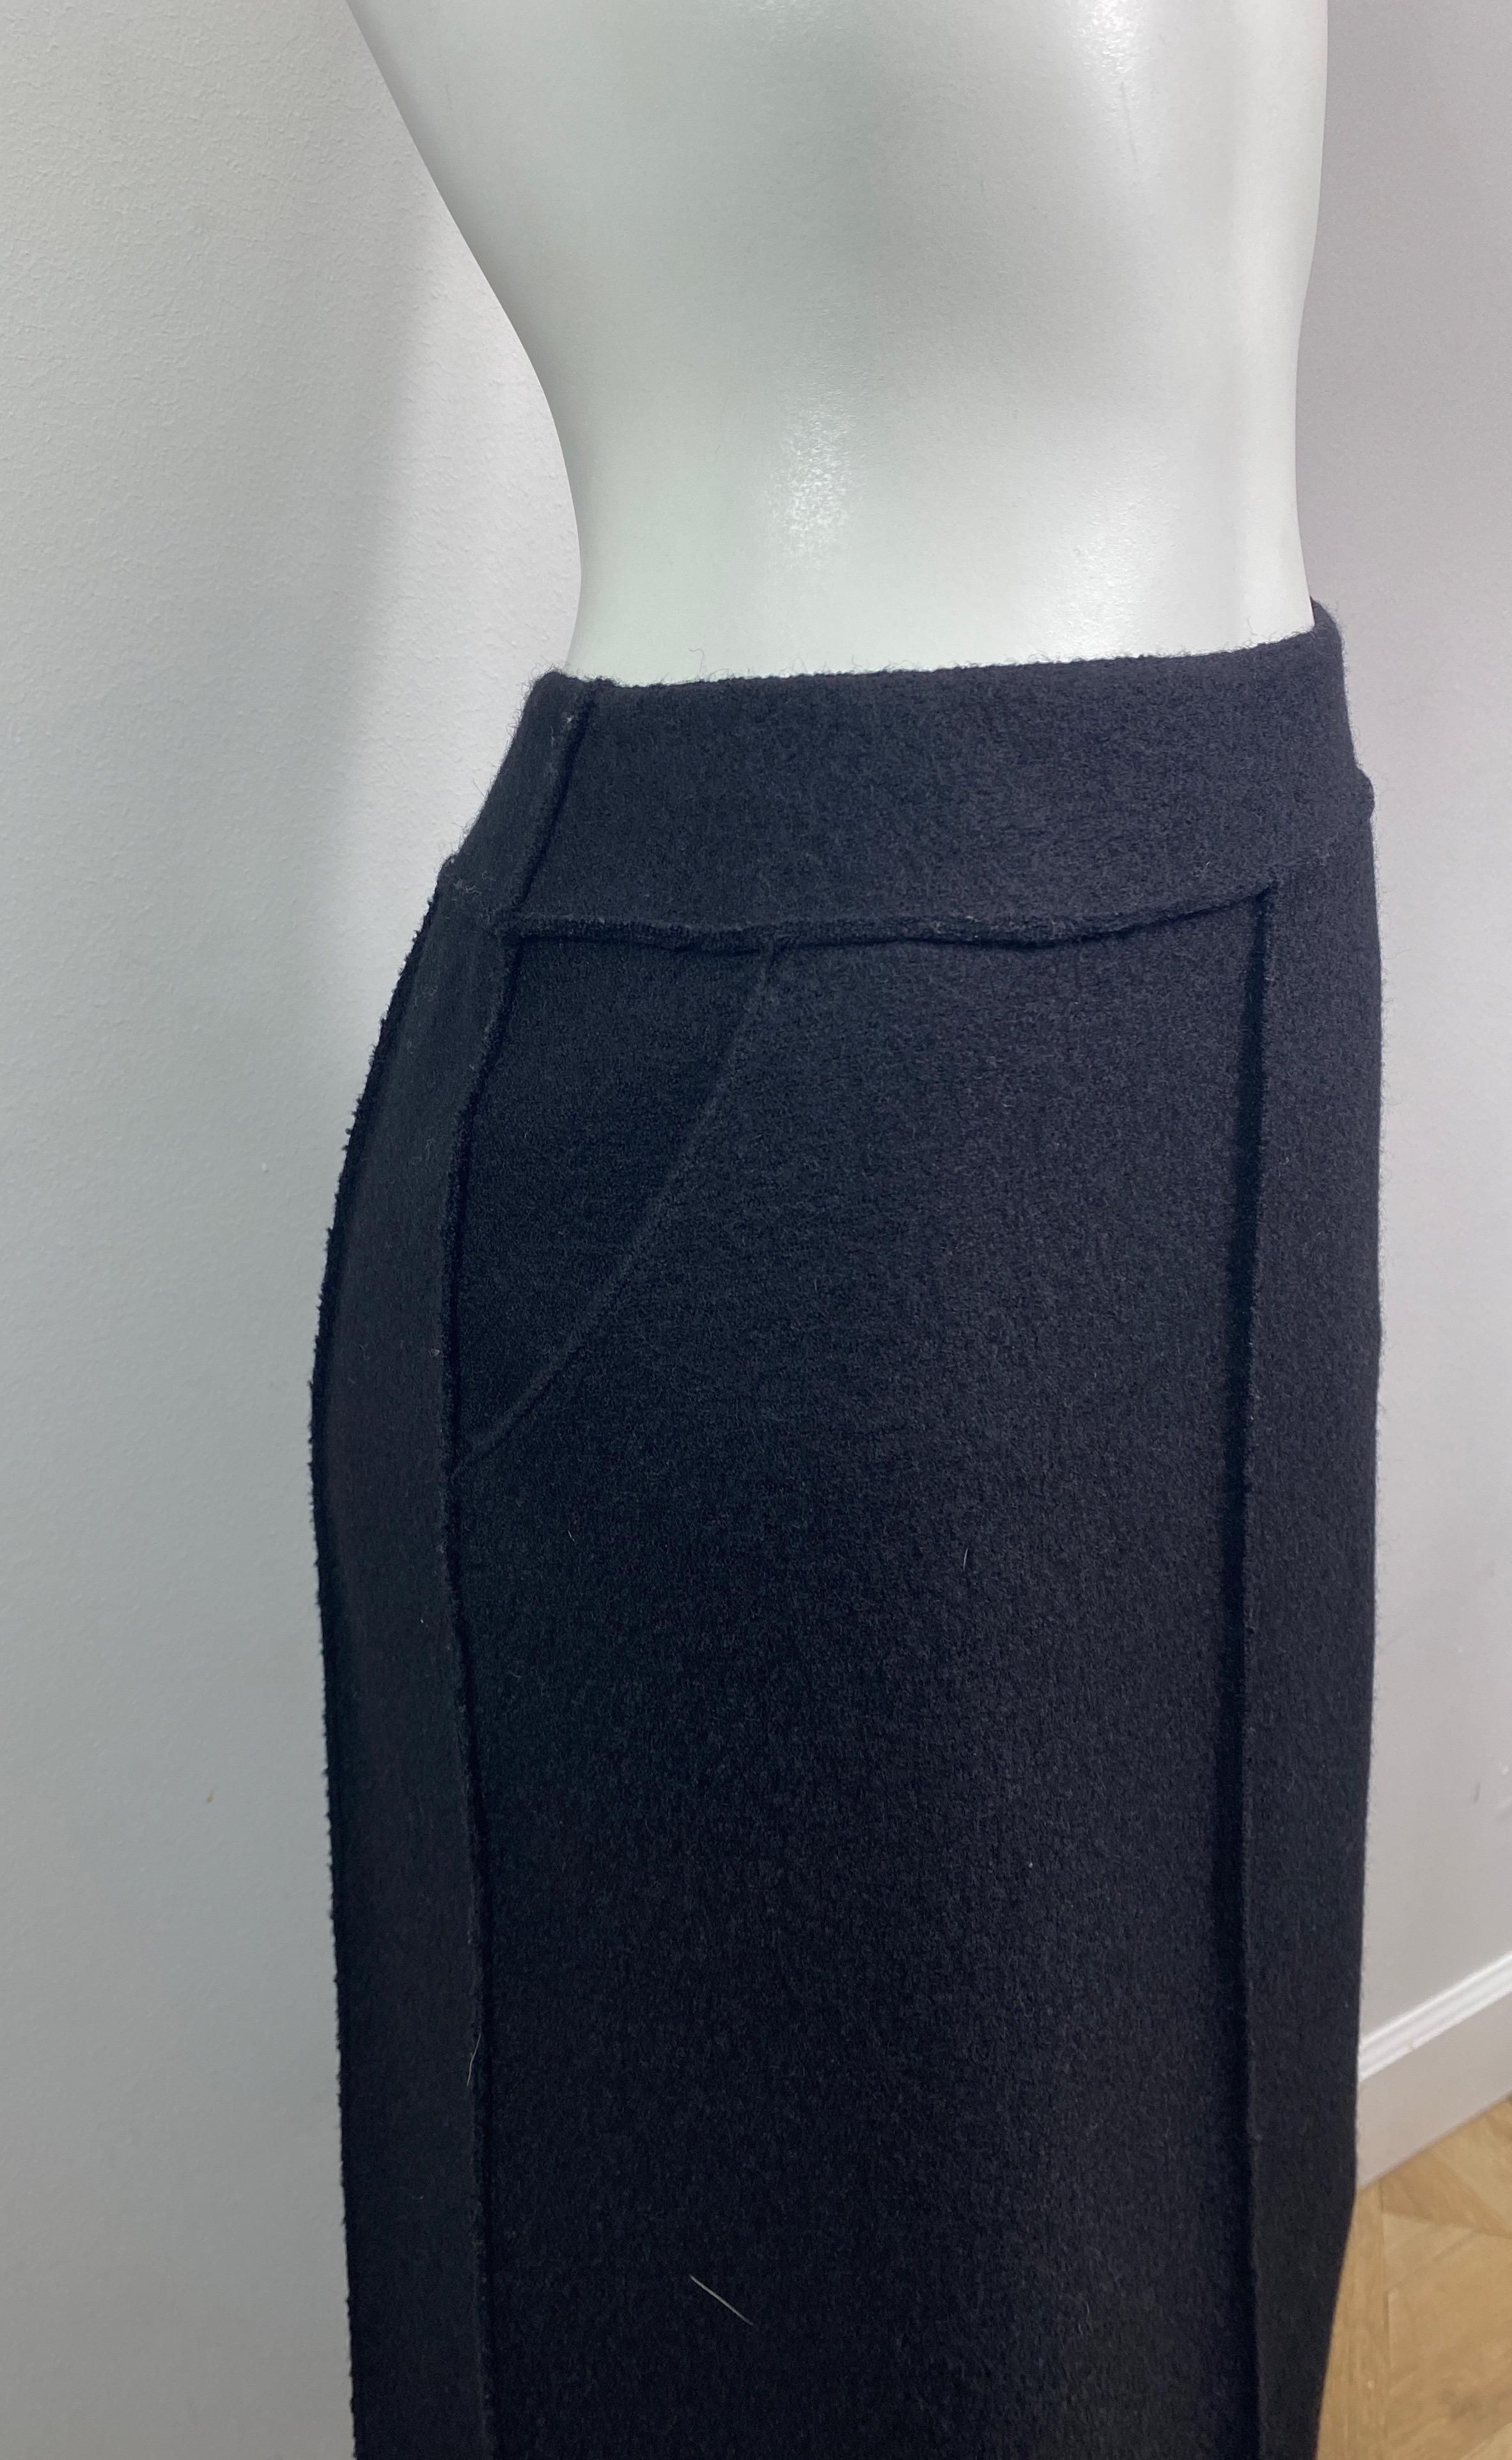 Chanel Runway Fall 1999 Black Wool Long Skirt -  Size 36 In Excellent Condition For Sale In West Palm Beach, FL